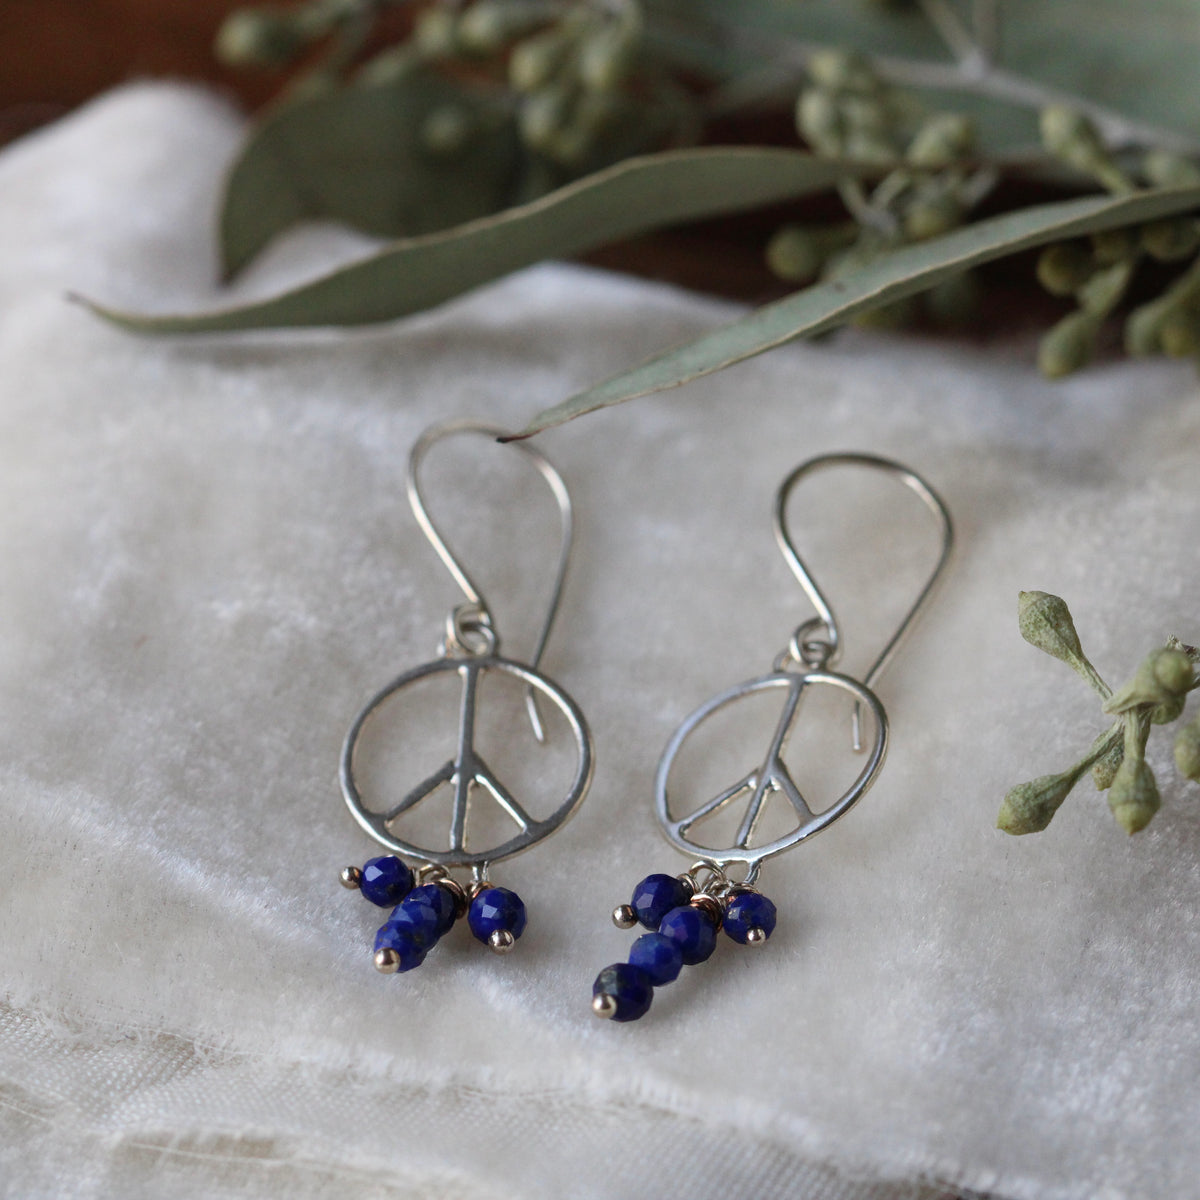 Clearance Sale Peace symbol dangle earrings sterling and Lapis Lazuli